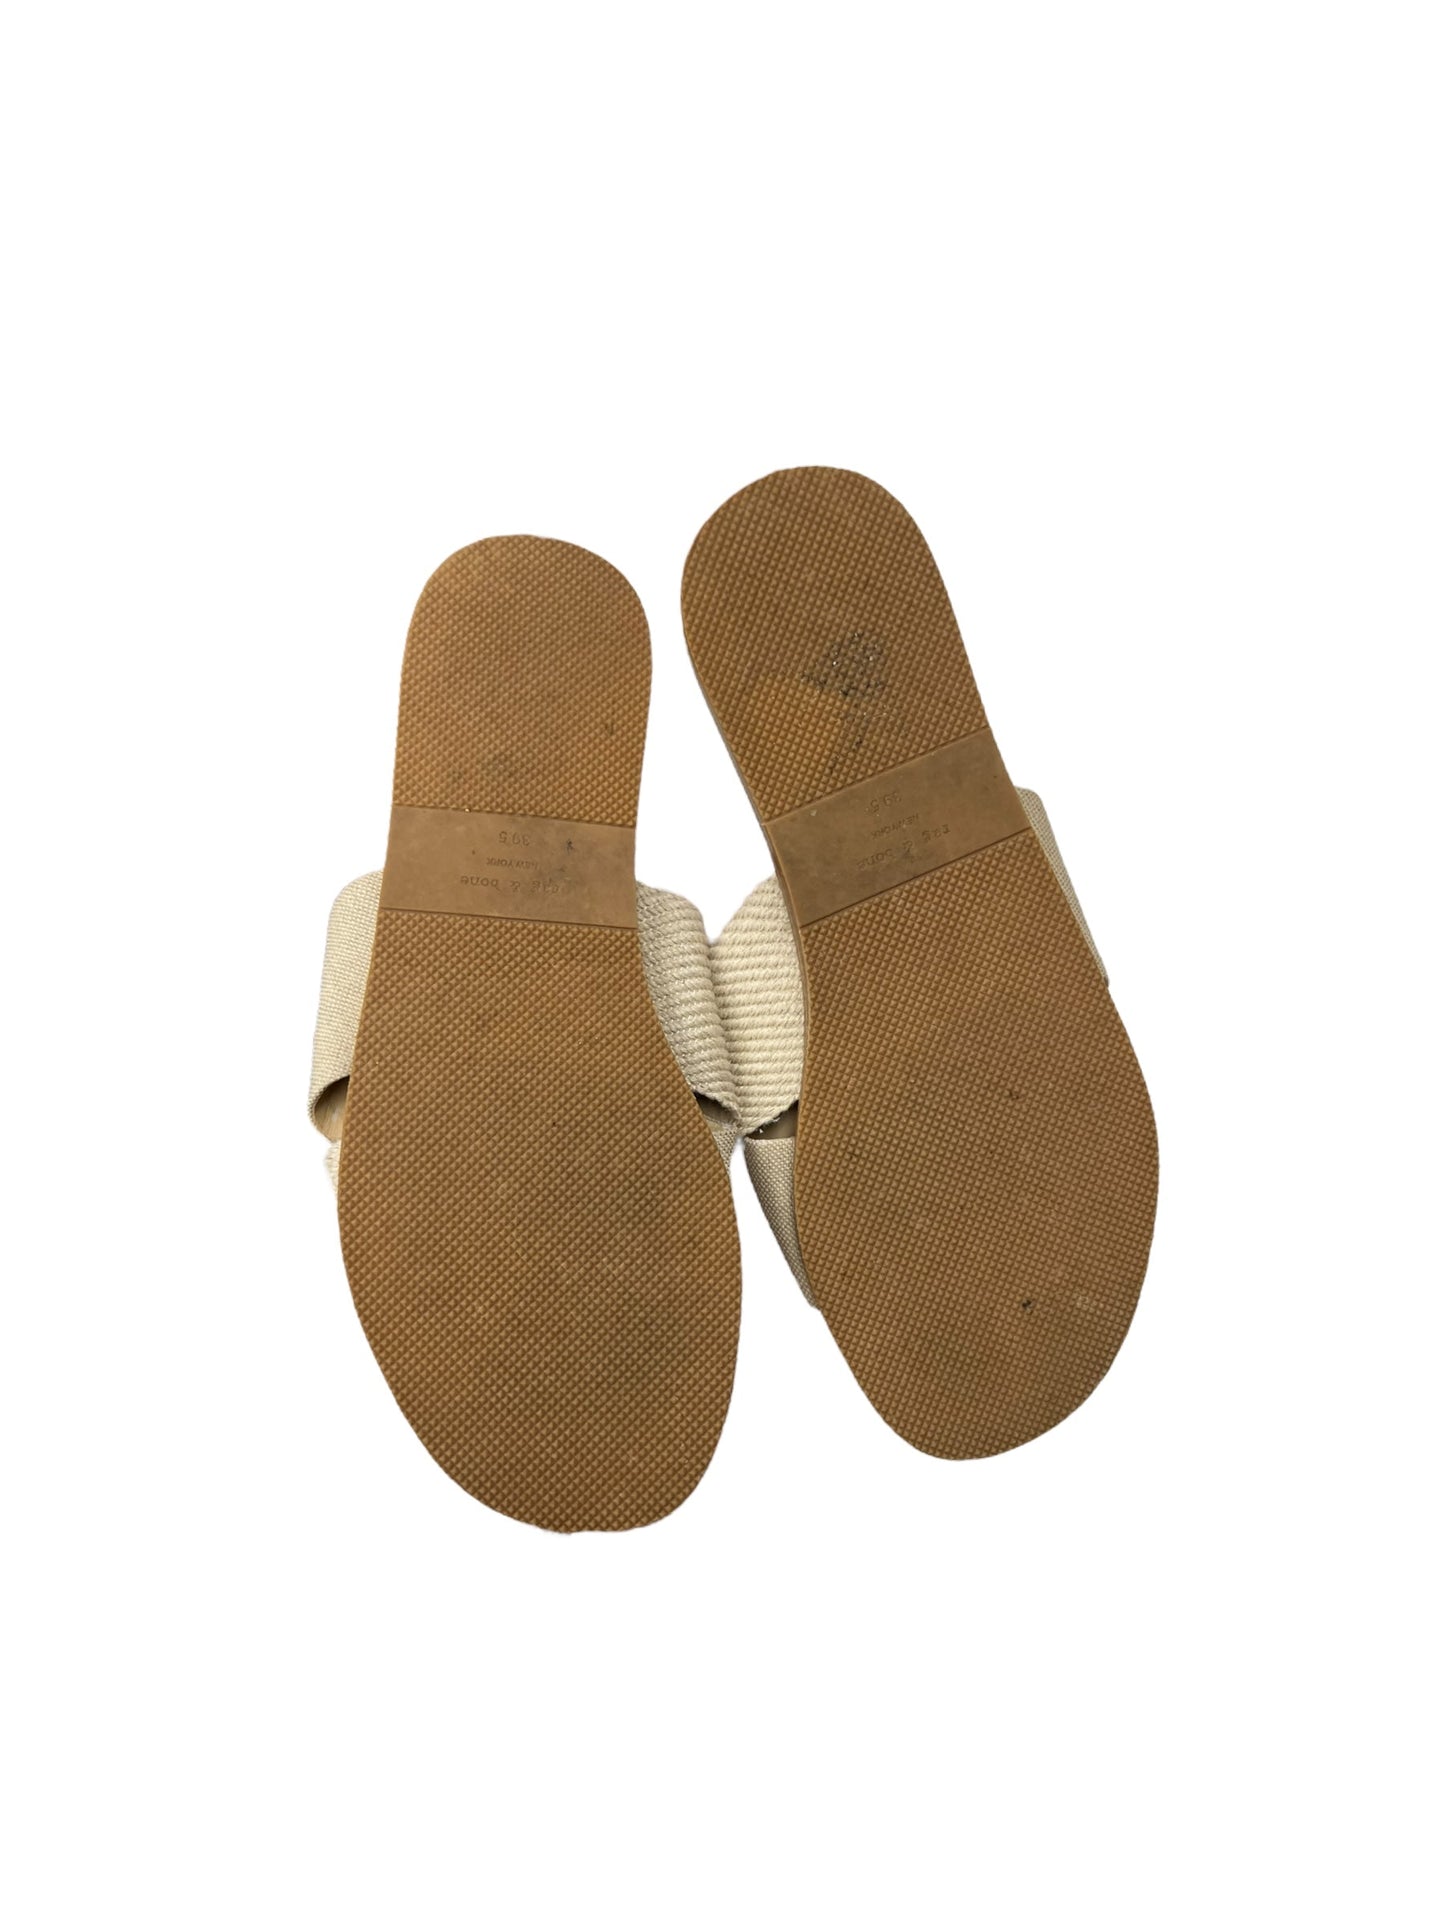 Sandals Flip Flops By Rag And Bone  Size: 9.5